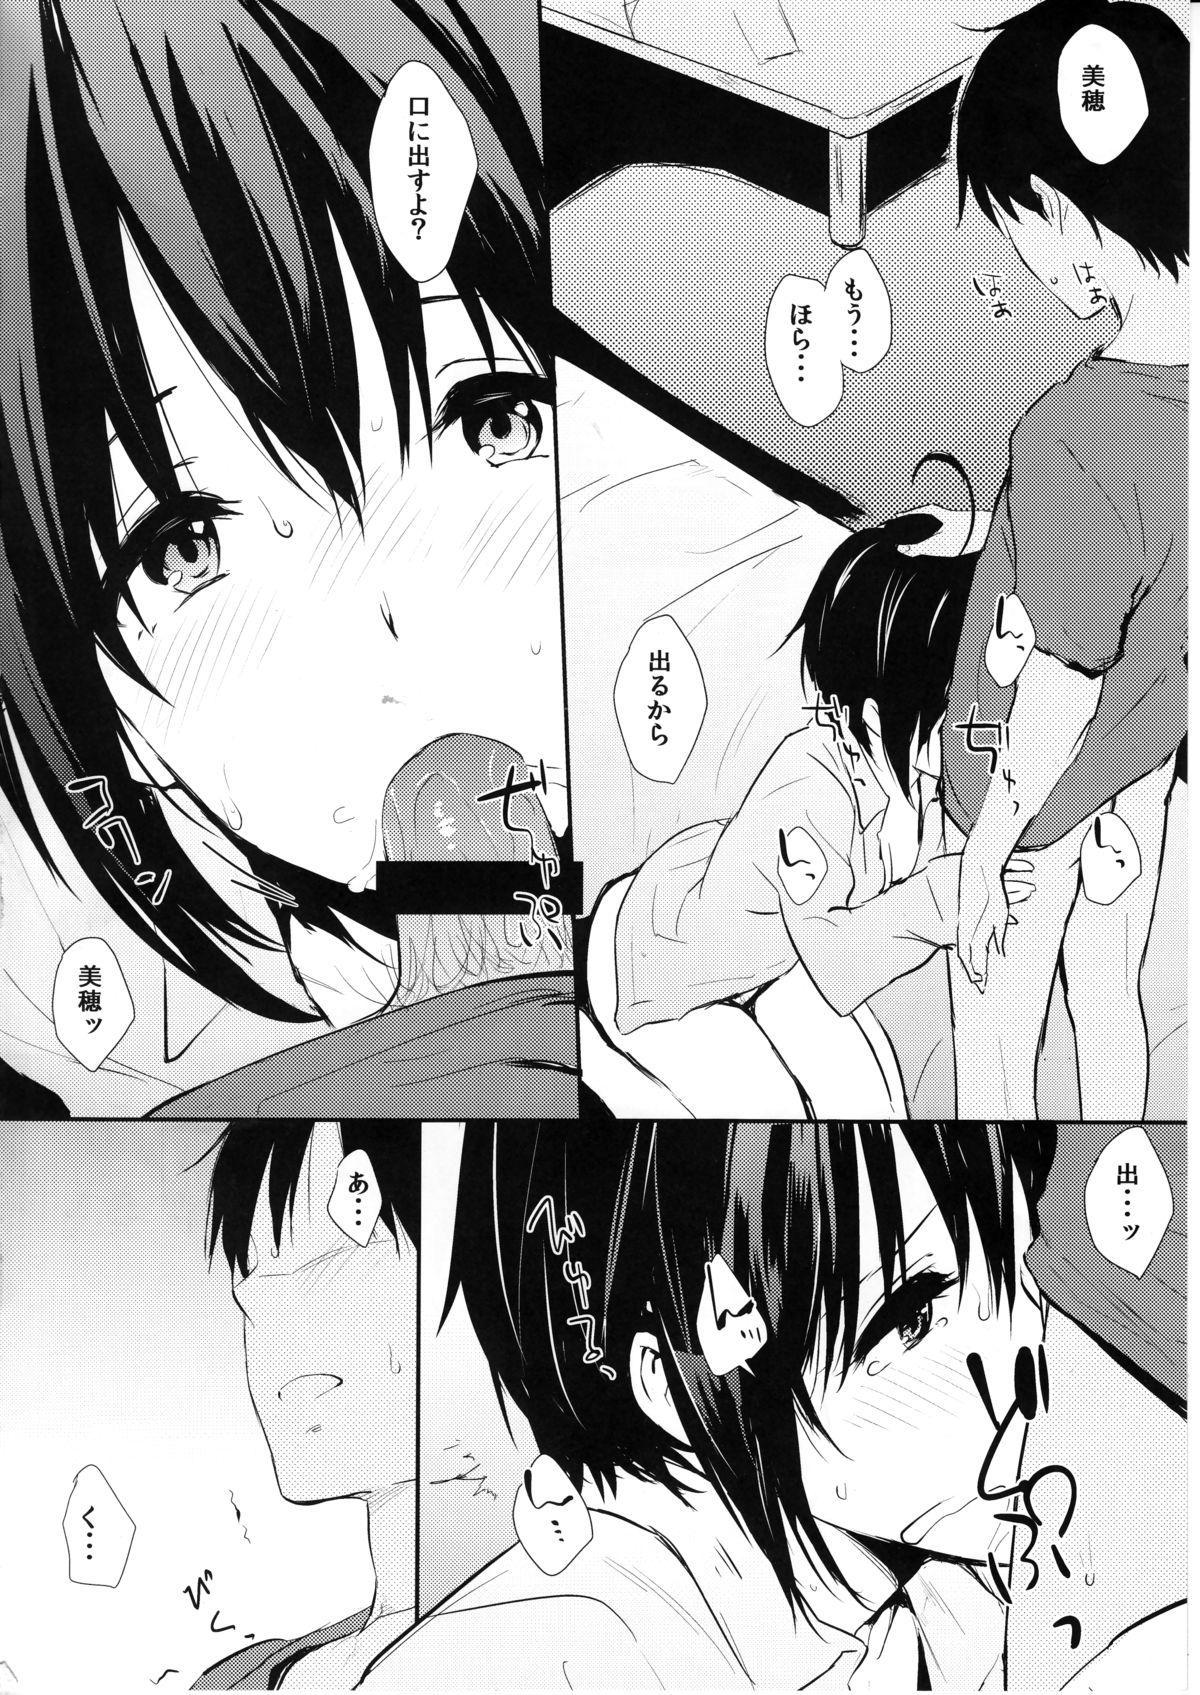 Lolicon Miho-ppoi no! - The idolmaster Fleshlight - Page 7